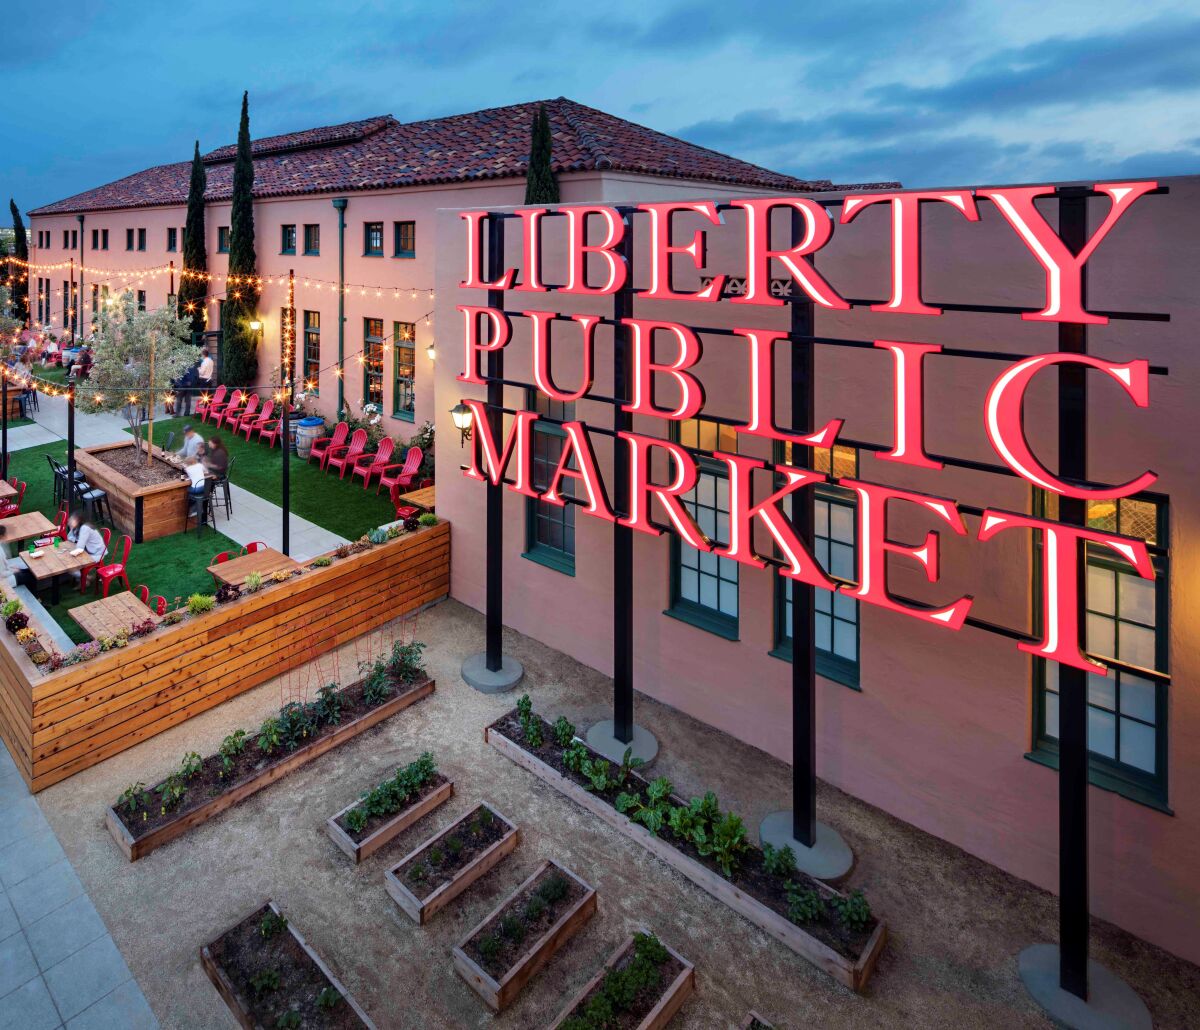 Liberty Public Market at Liberty Station in Point Loma is expanding by 6,000 square feet in multiple phases.